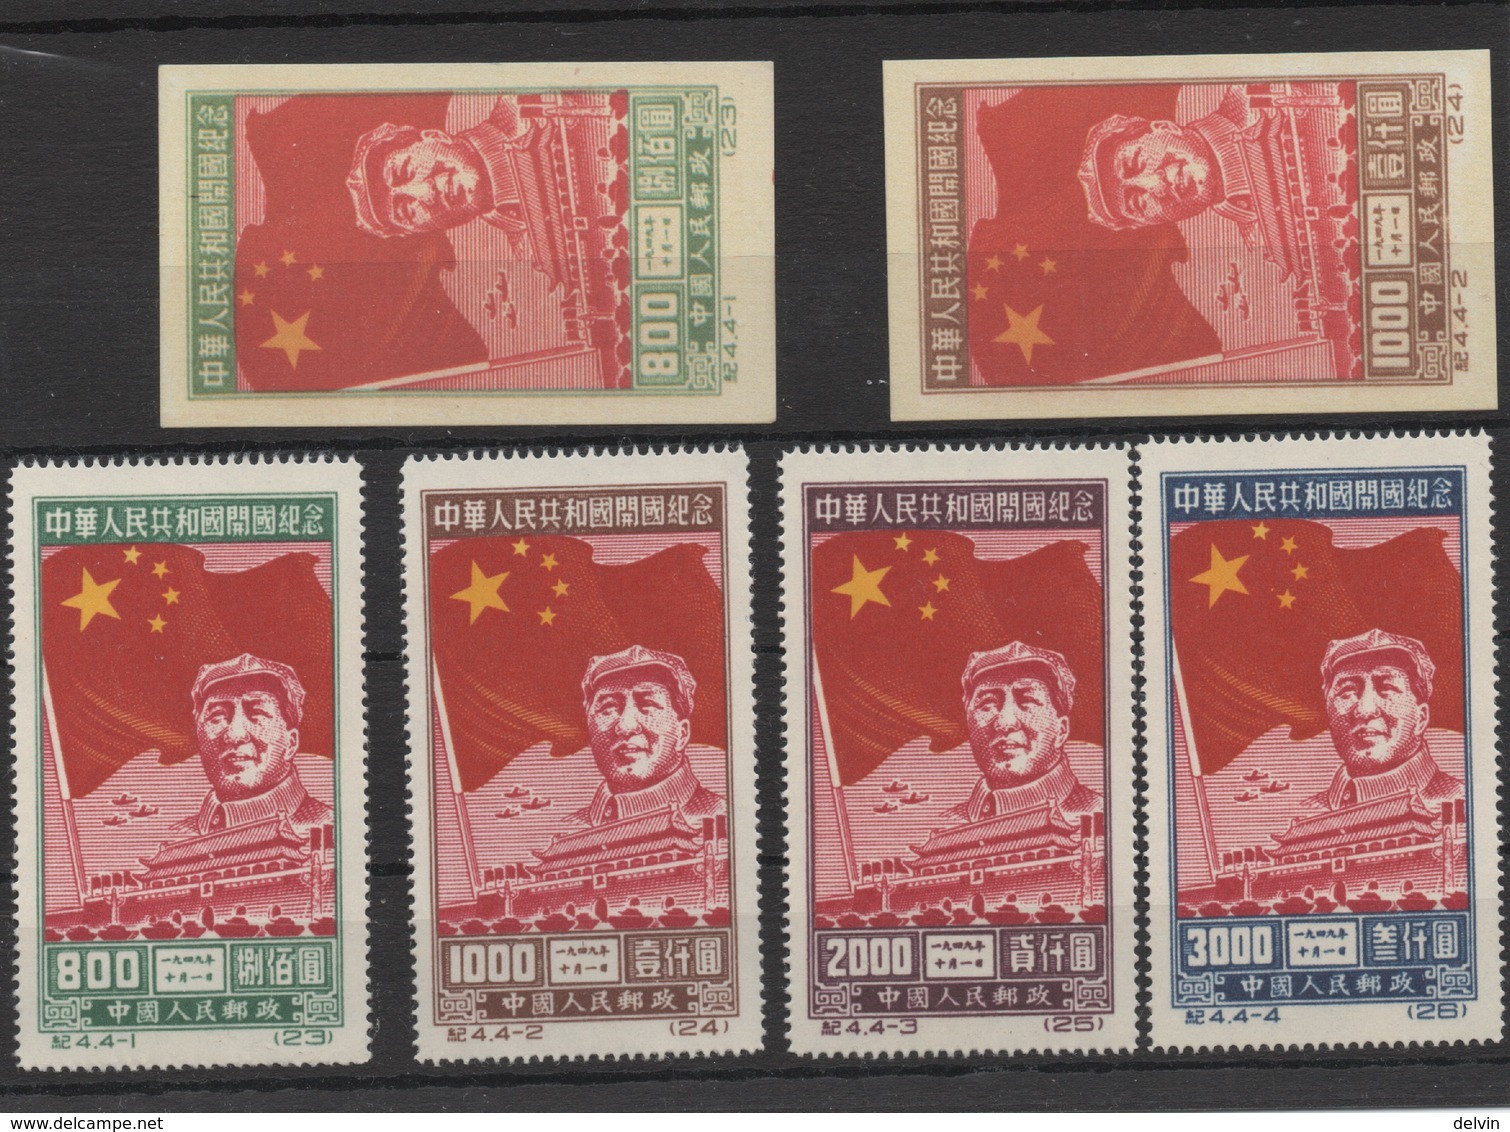 China 1950-Mao Tze Tung And Flag -4 Complete Sets Of 24 Stamps Perf.& Imperf. Reprint Of The Era. New No Gum (see Photo) - Offizielle Neudrucke